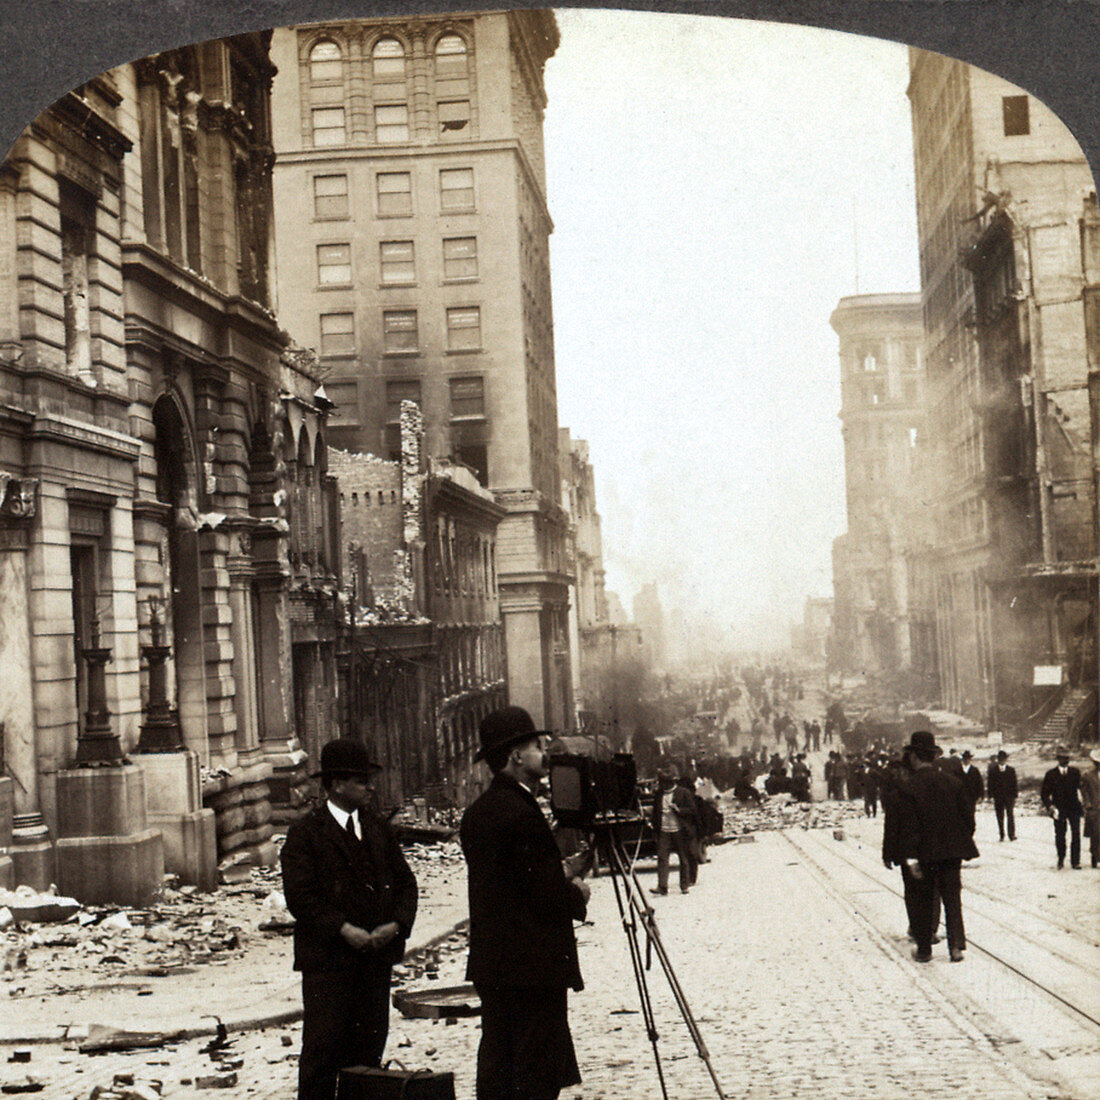 Photographing Aftermath of San Francisco Earthquake, 1906